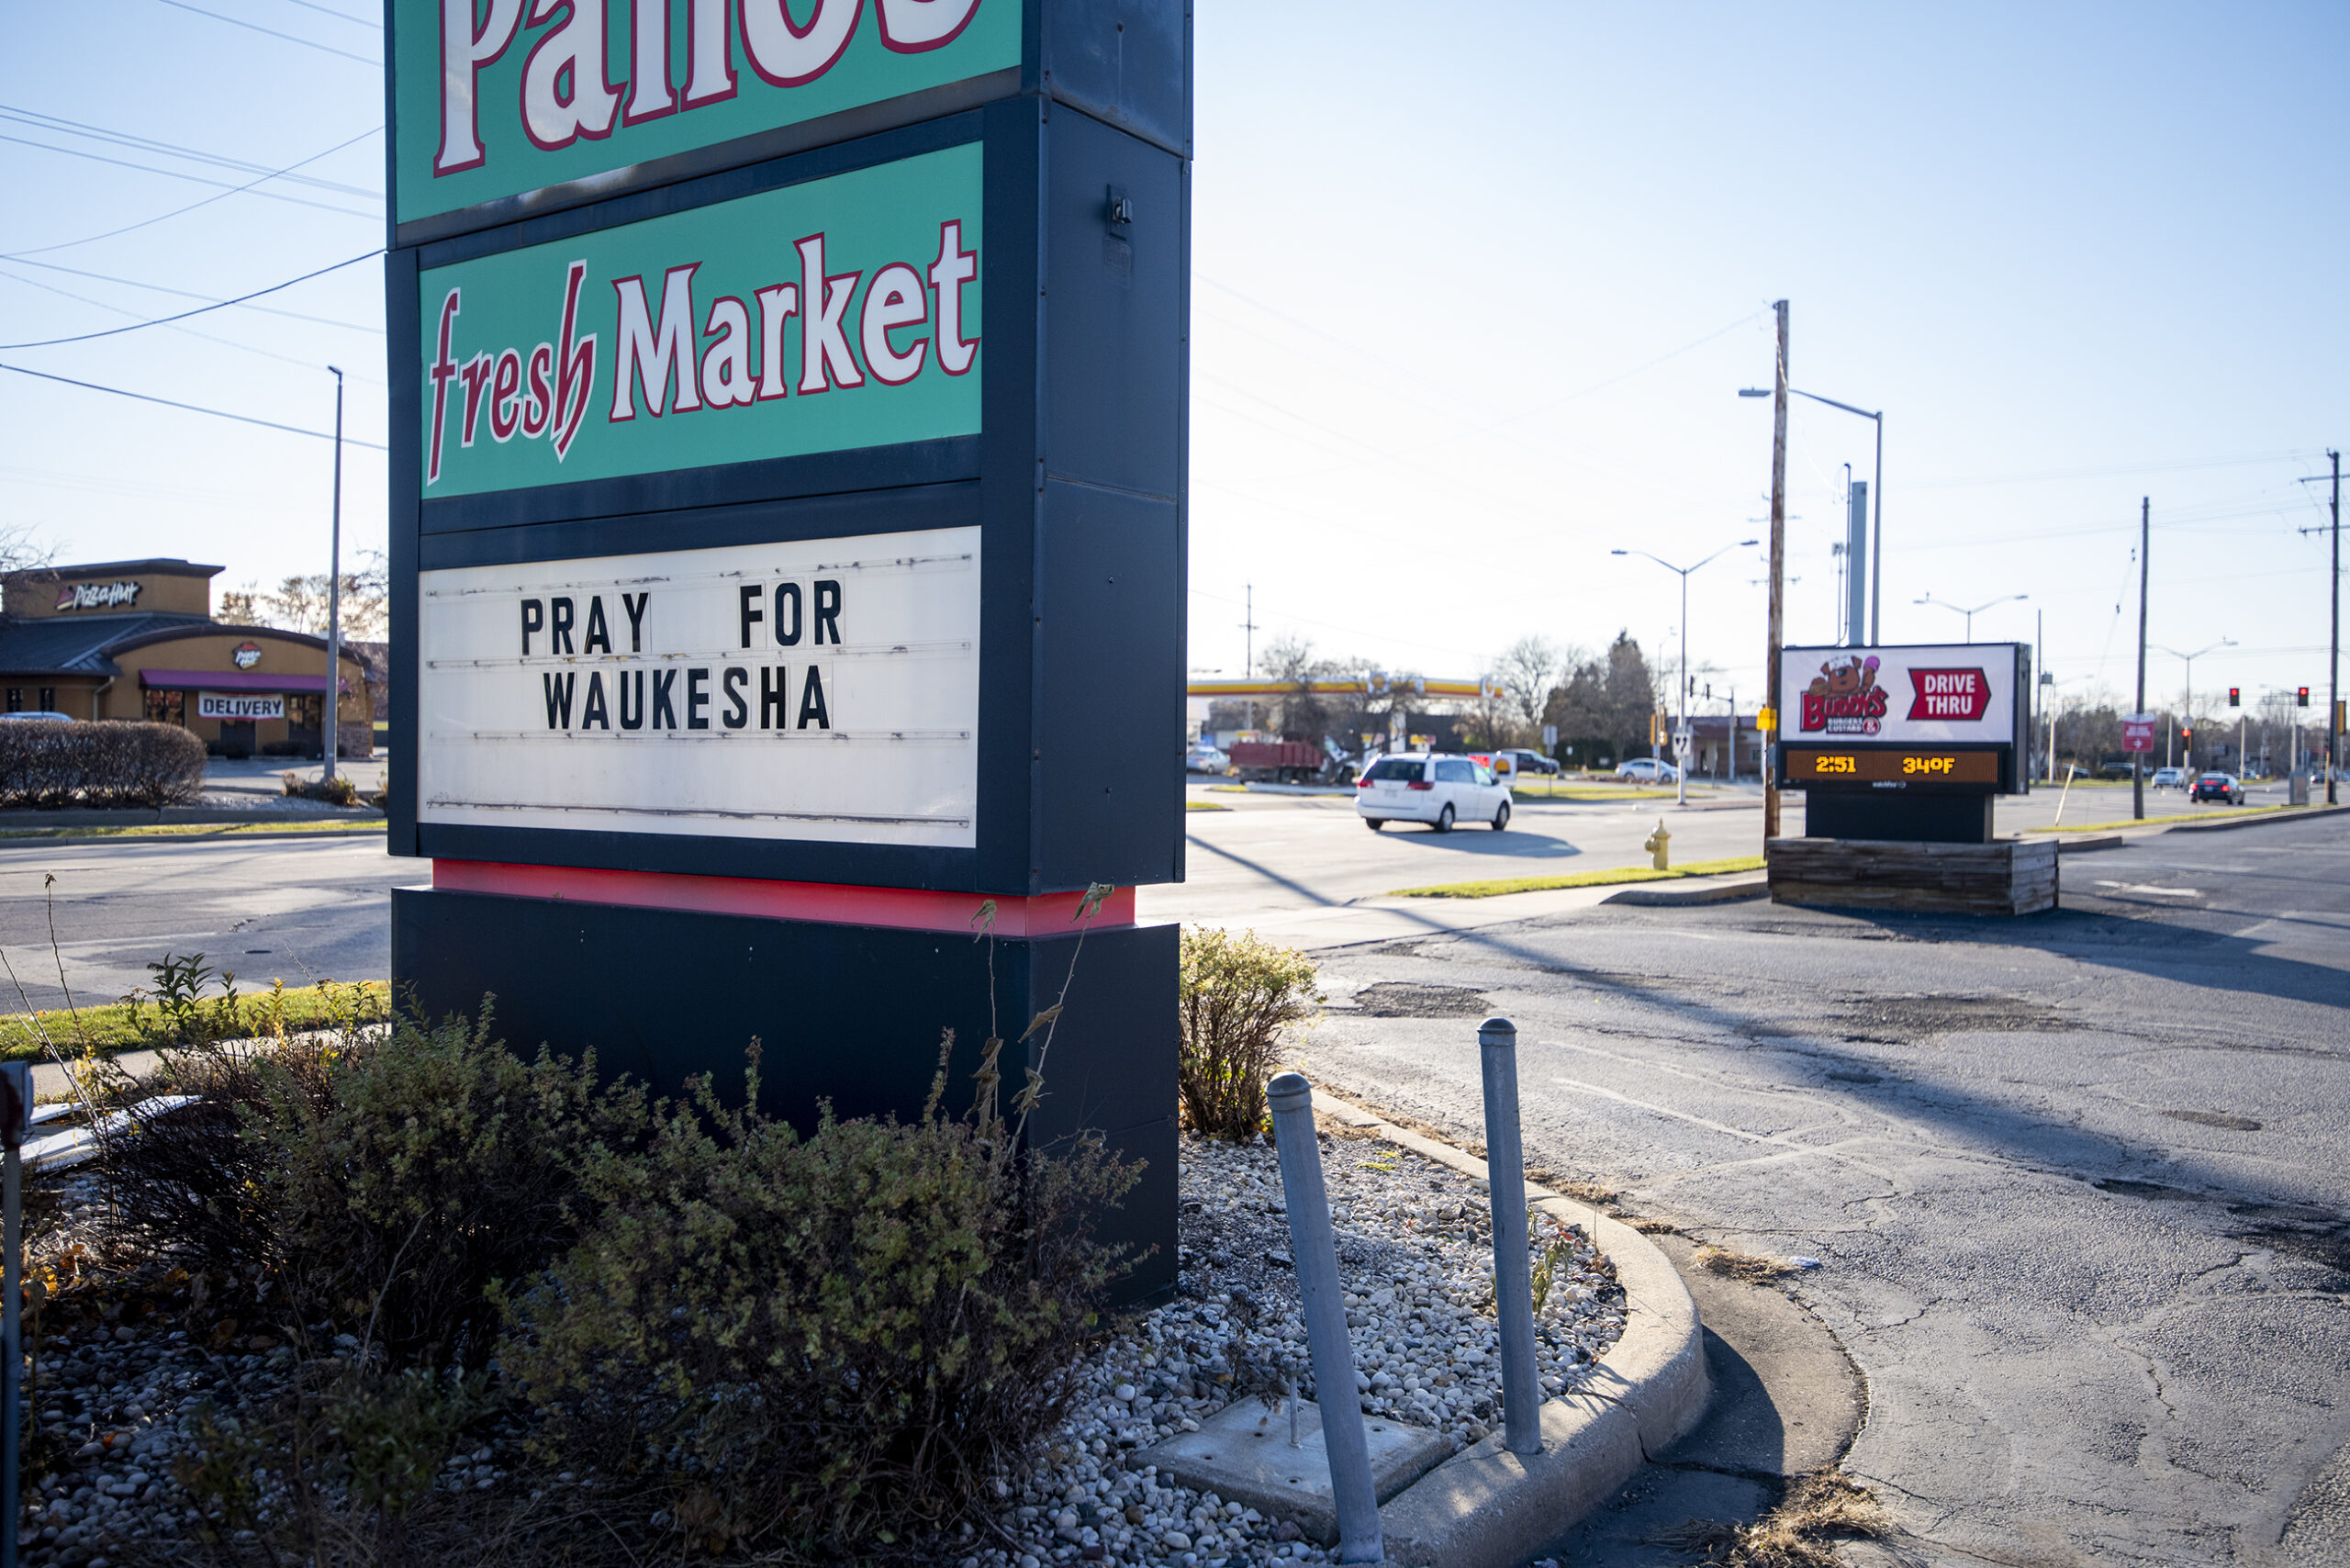 A business' sign says "Pray for Waukesha" as cars drive by.